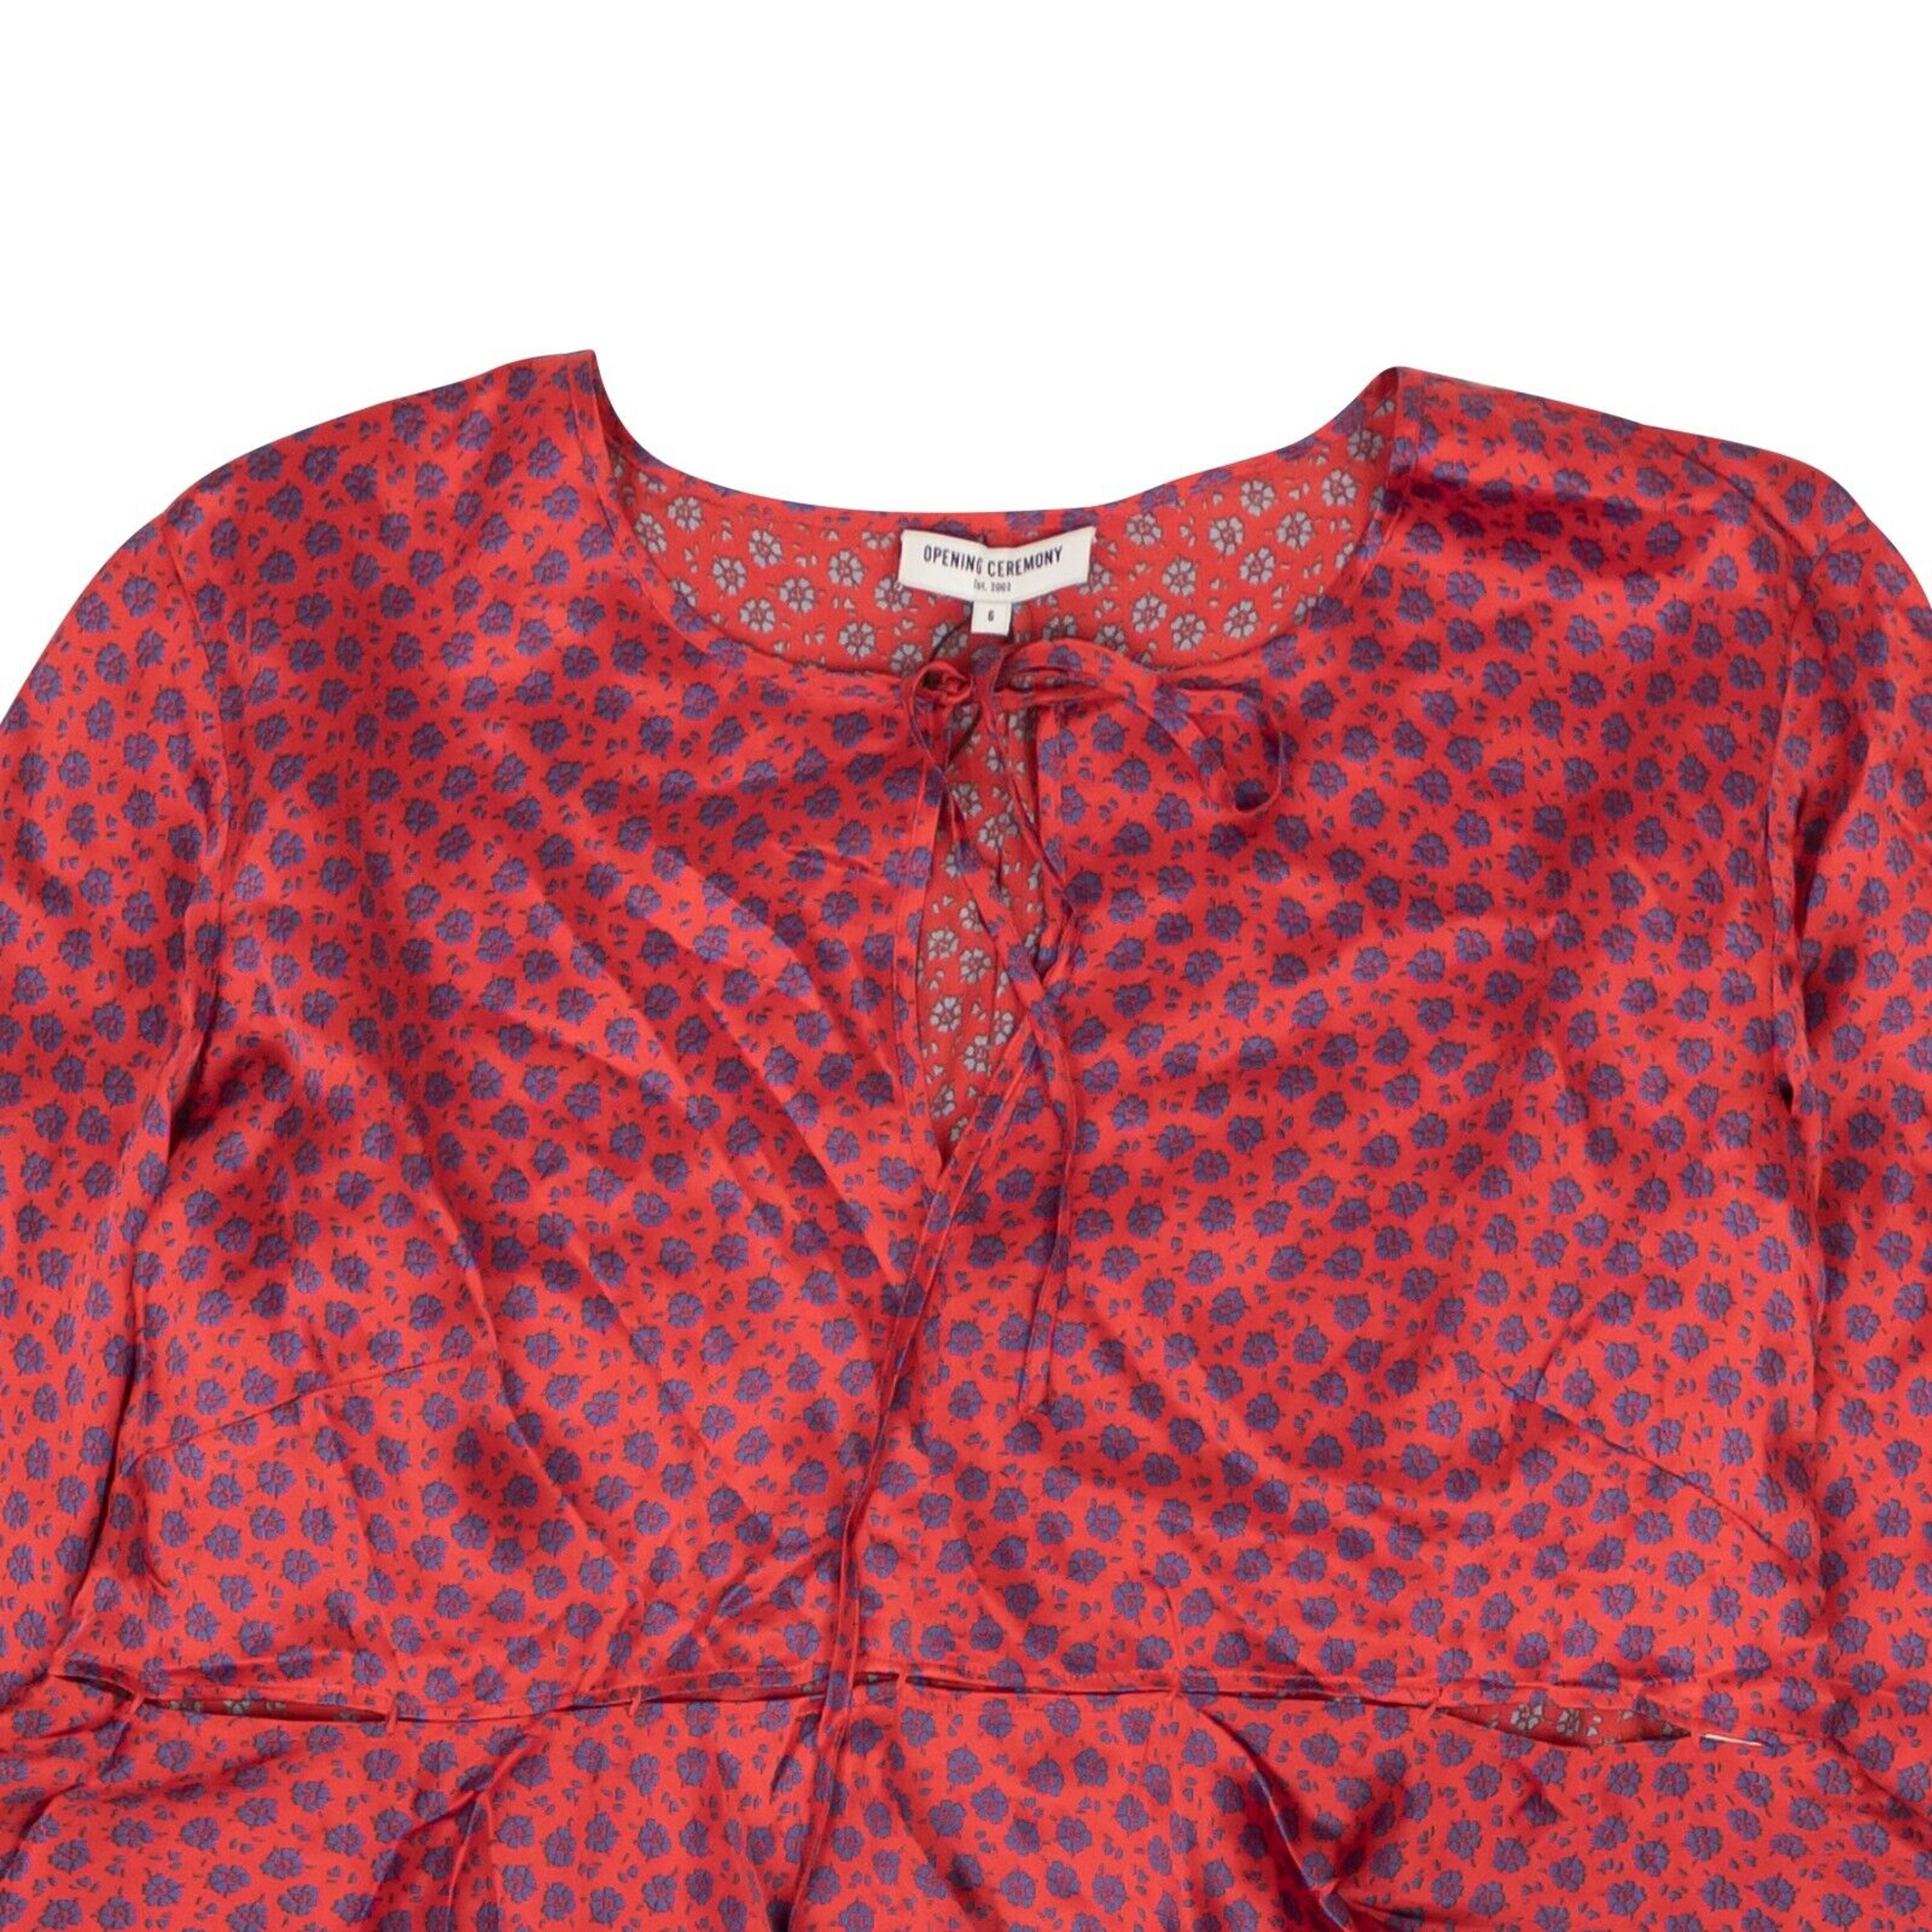 Alternate View 2 of Opening Ceremony Silk Cropped Floral Flounce Blouse - Red